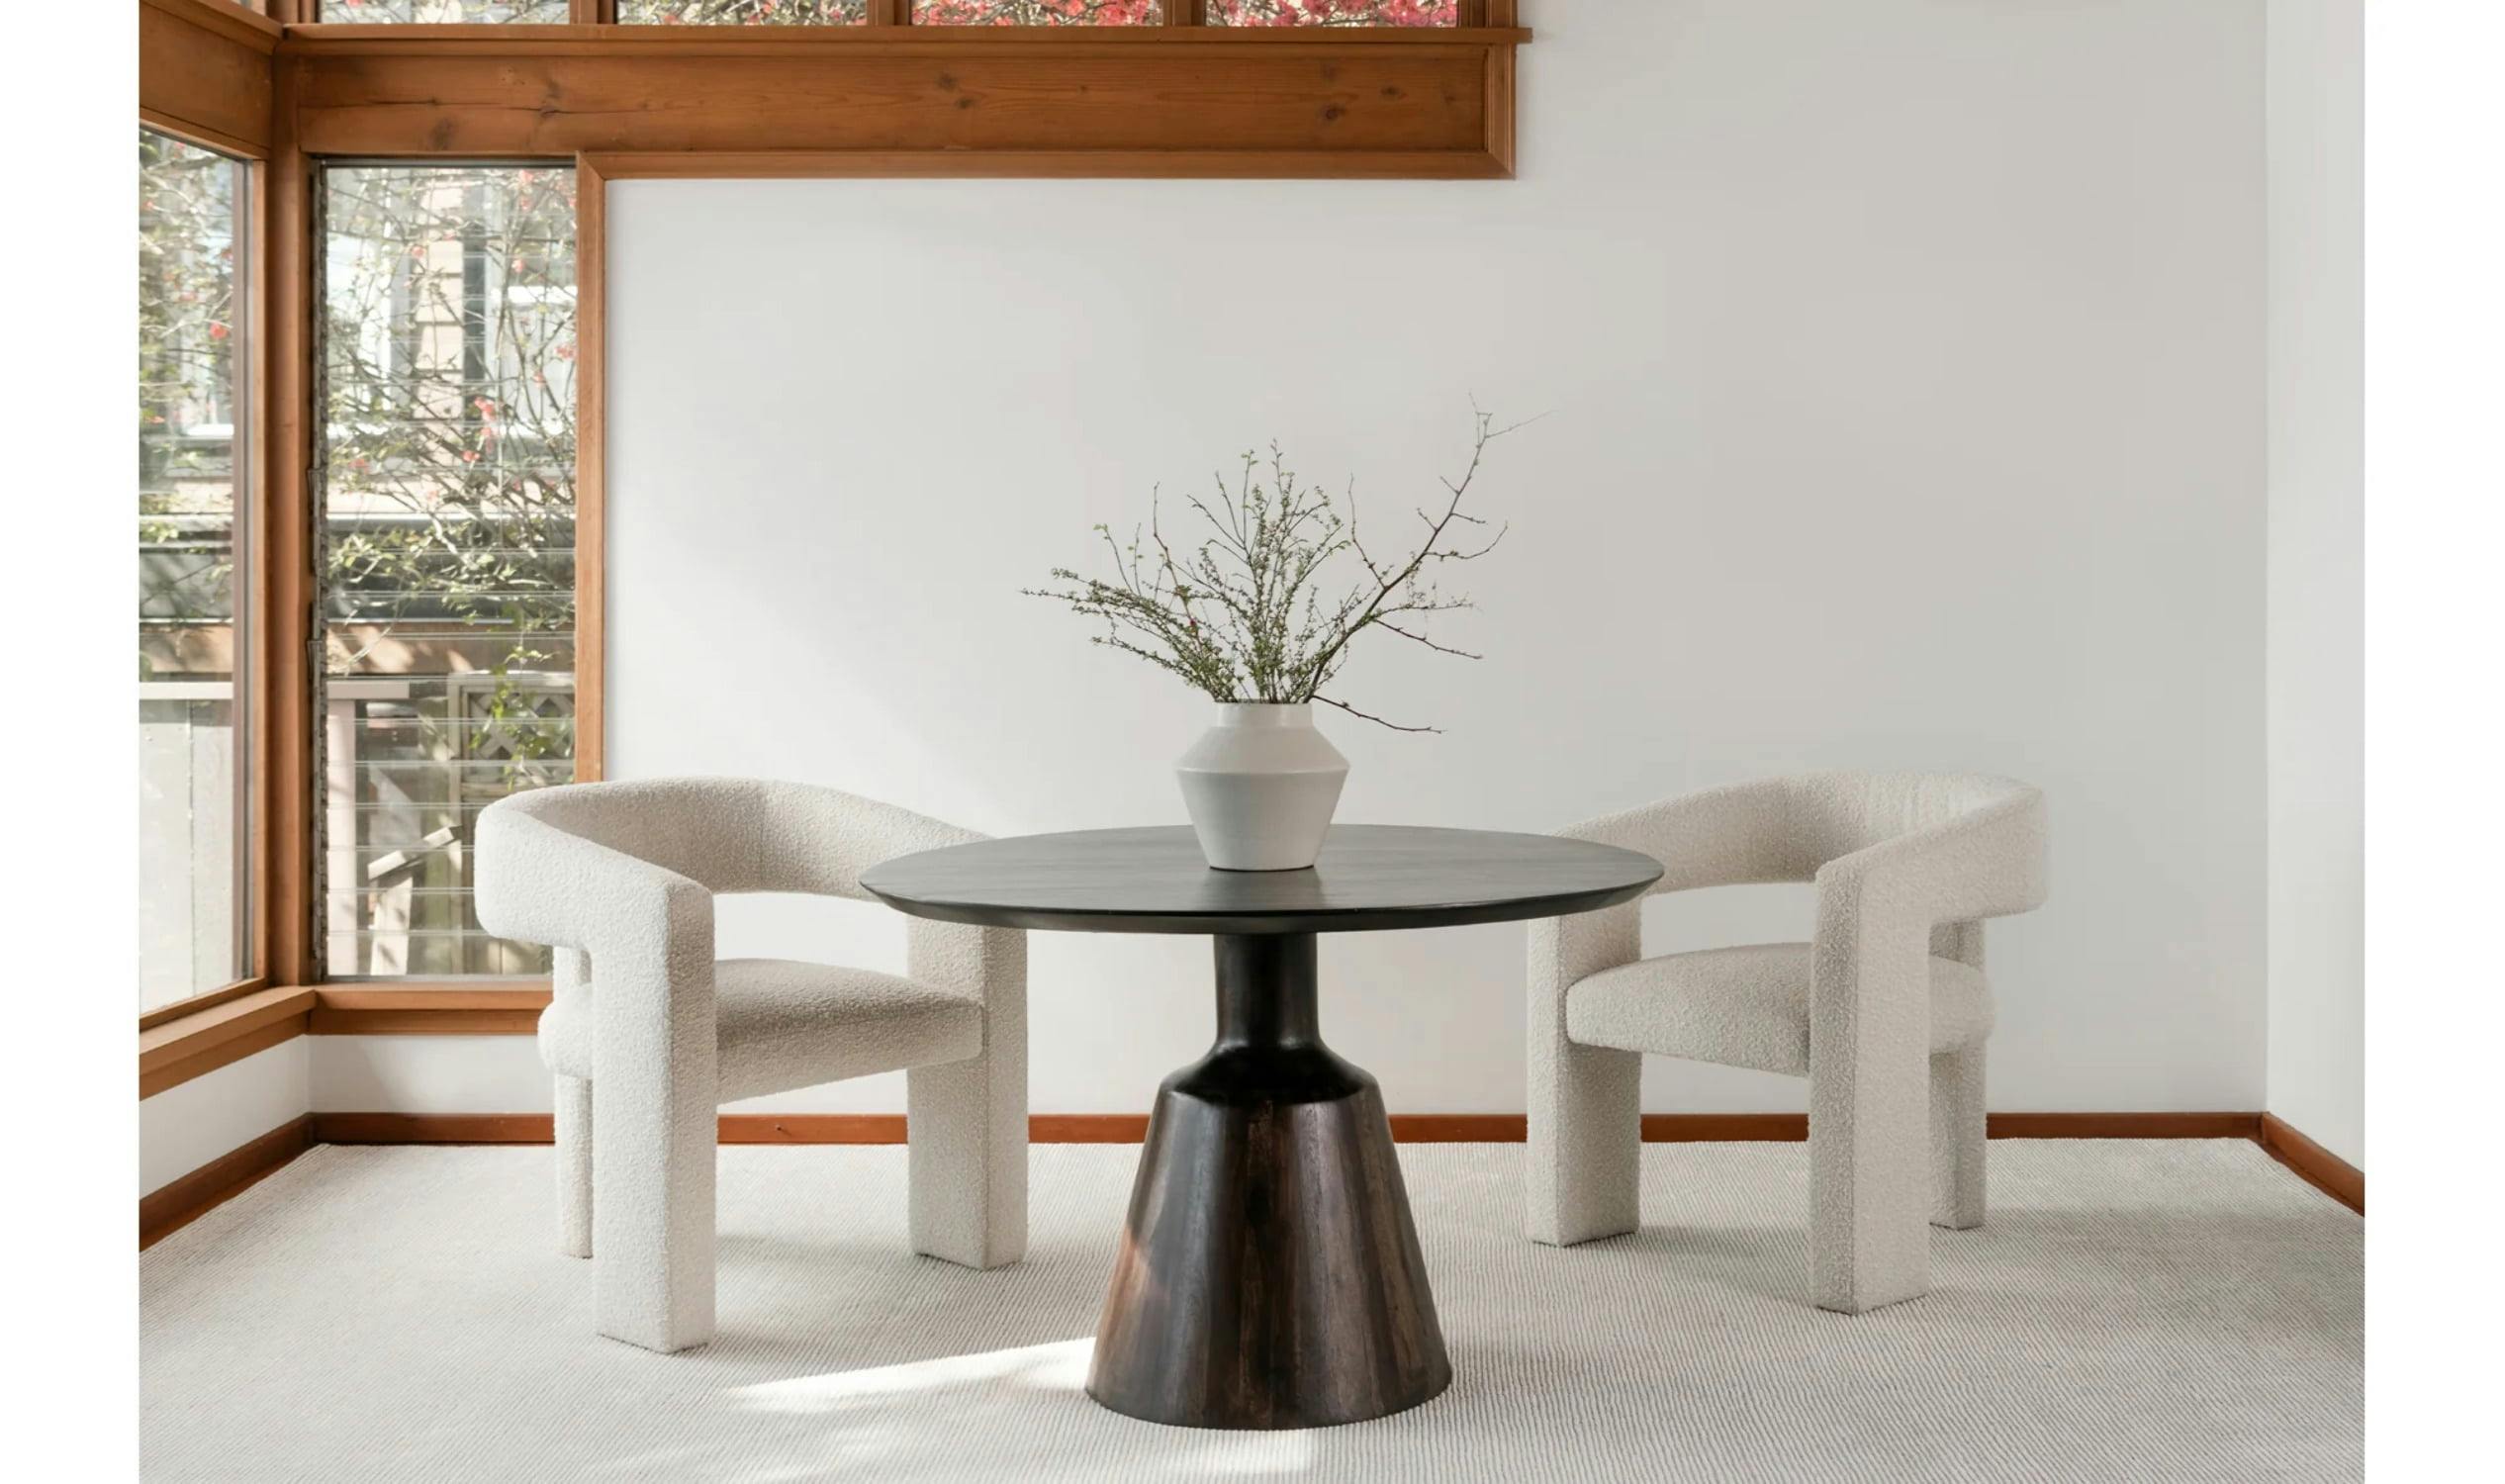 Belize 46" Dark Gray Round Wood Dining Table